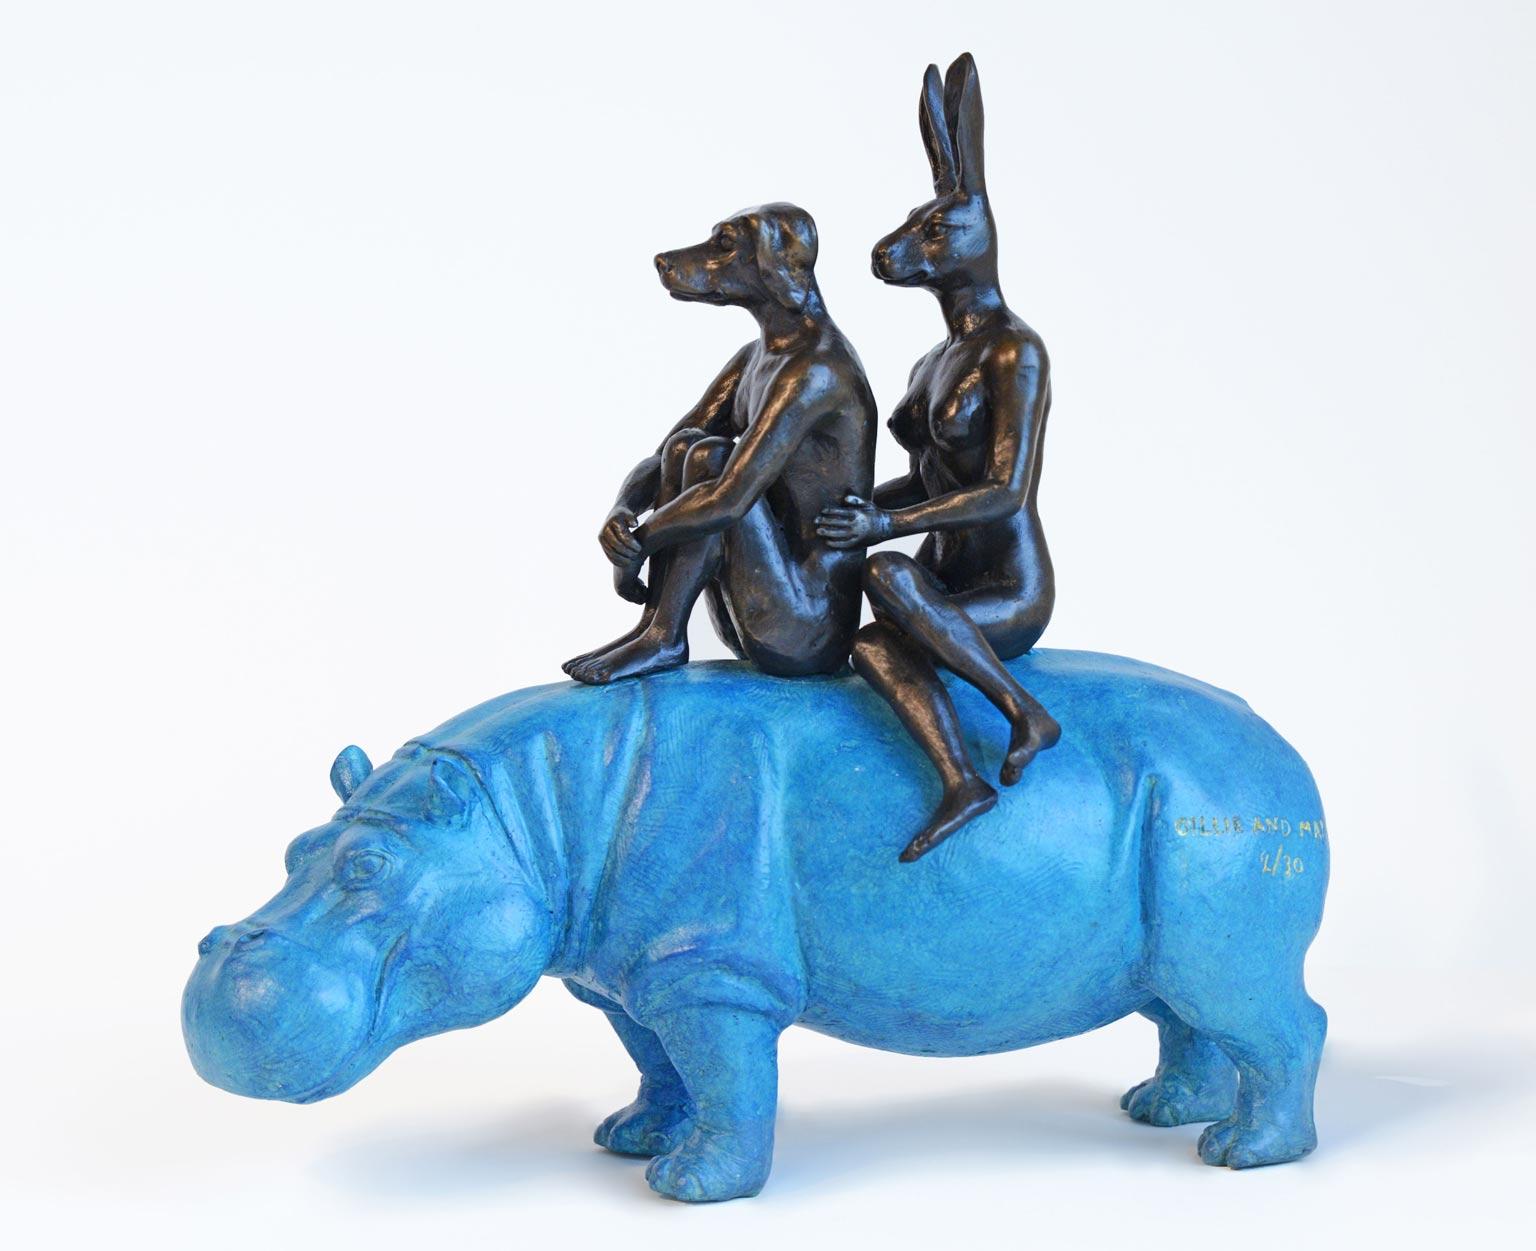 Title: They were happy hippo riders
Authentic bronze sculpture
Limited Edition

World Famous Contemporary Artists: Husband and wife team, Gillie and Marc, are New York and Sydney-based contemporary artists who collaborate to create artworks as one.